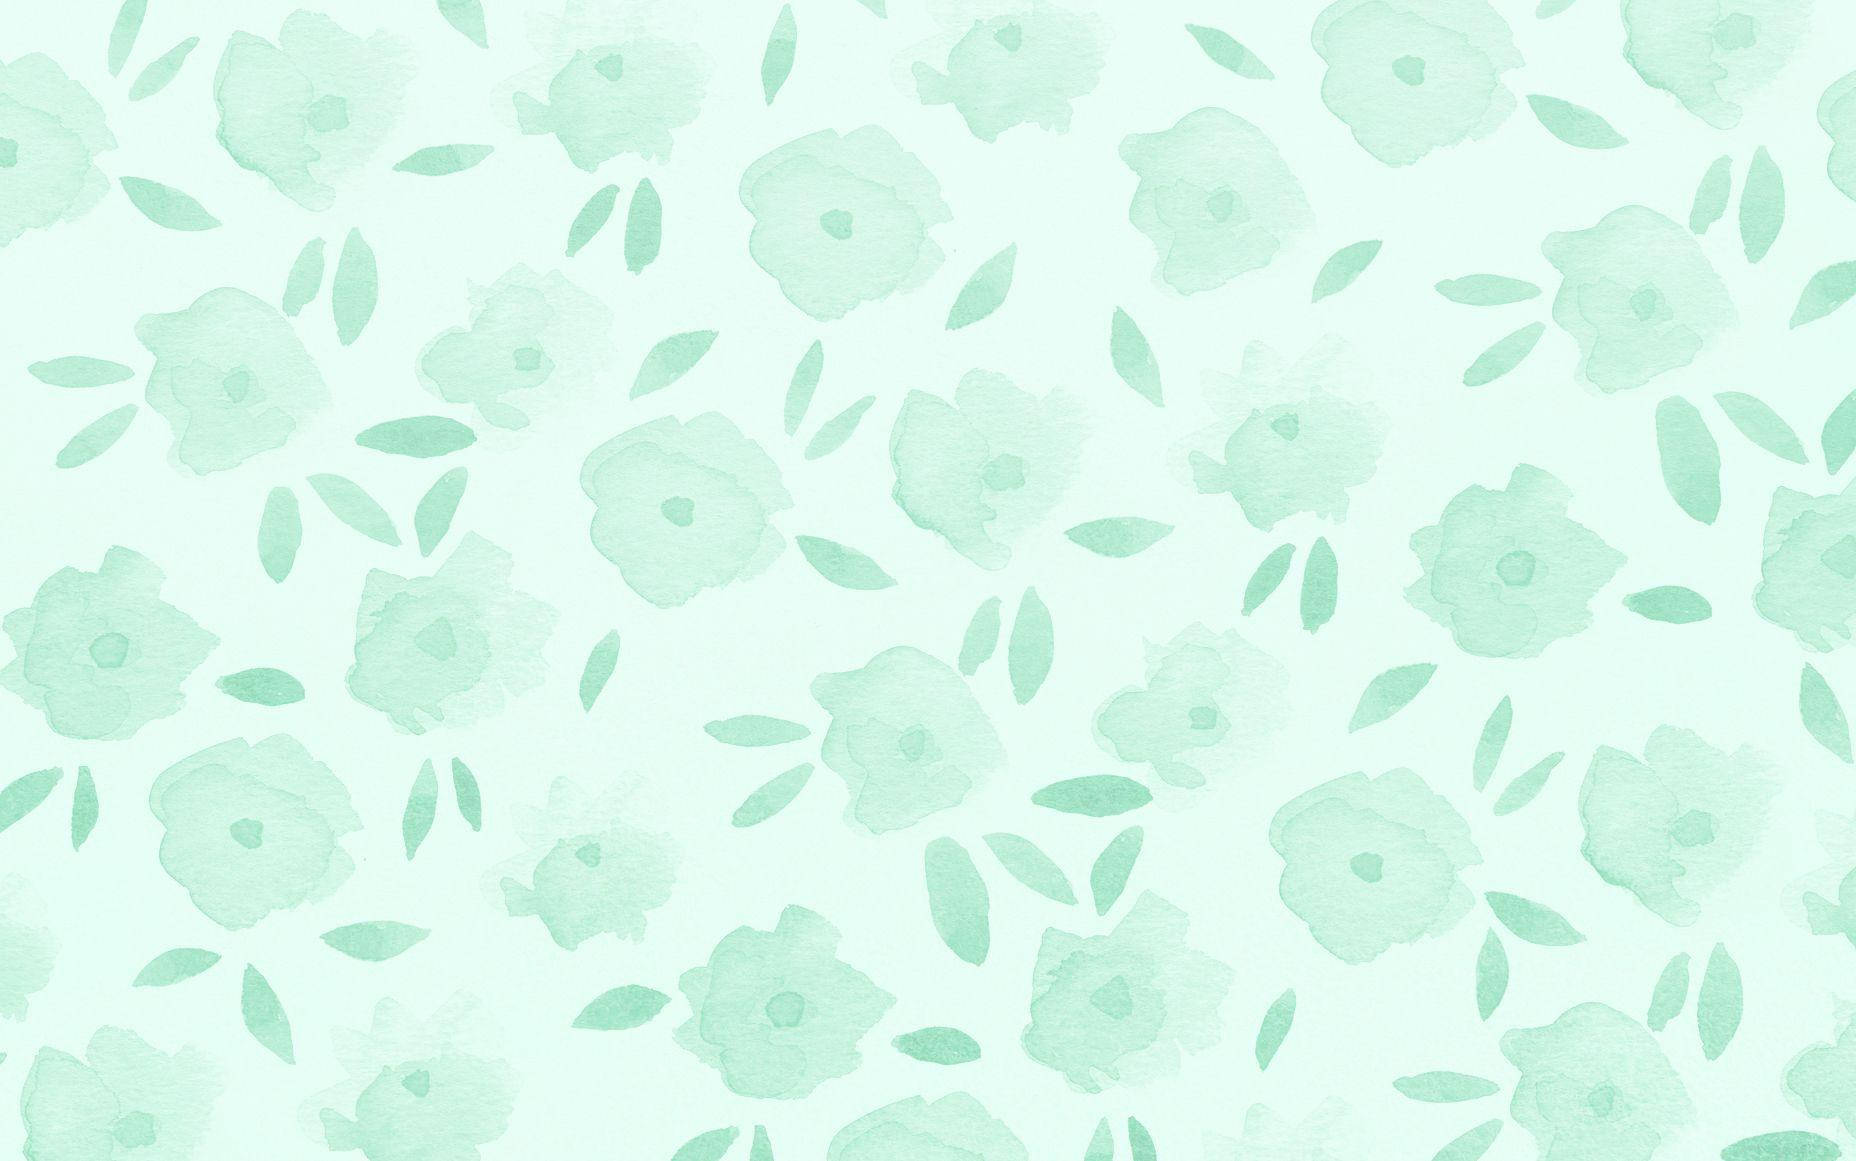 Delightful Digital Aesthetic Teal Smudgy Roses Background